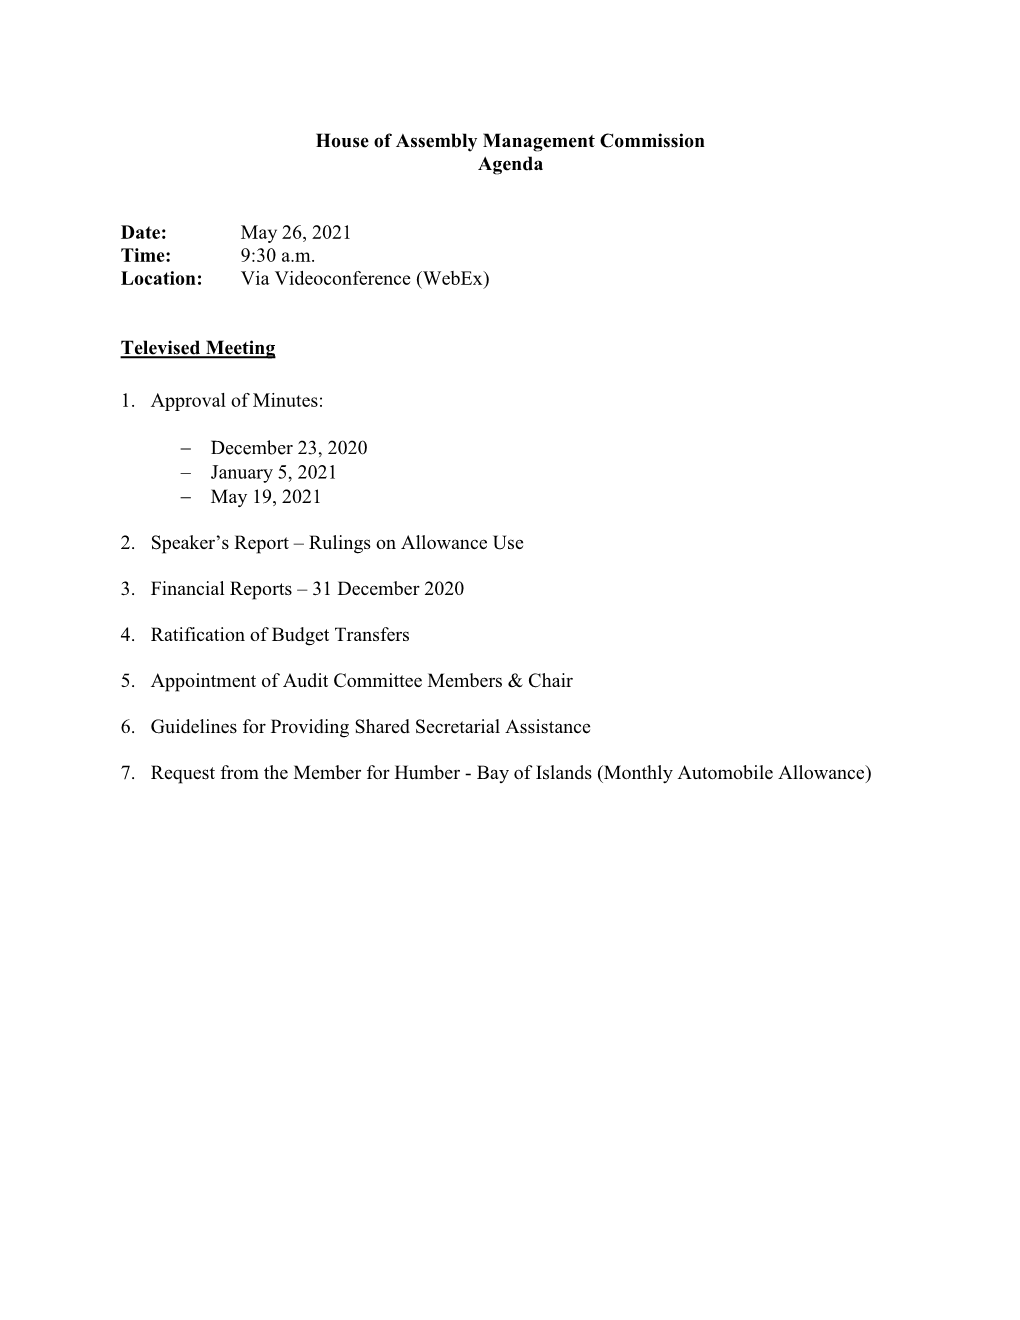 House of Assembly Management Commission Agenda